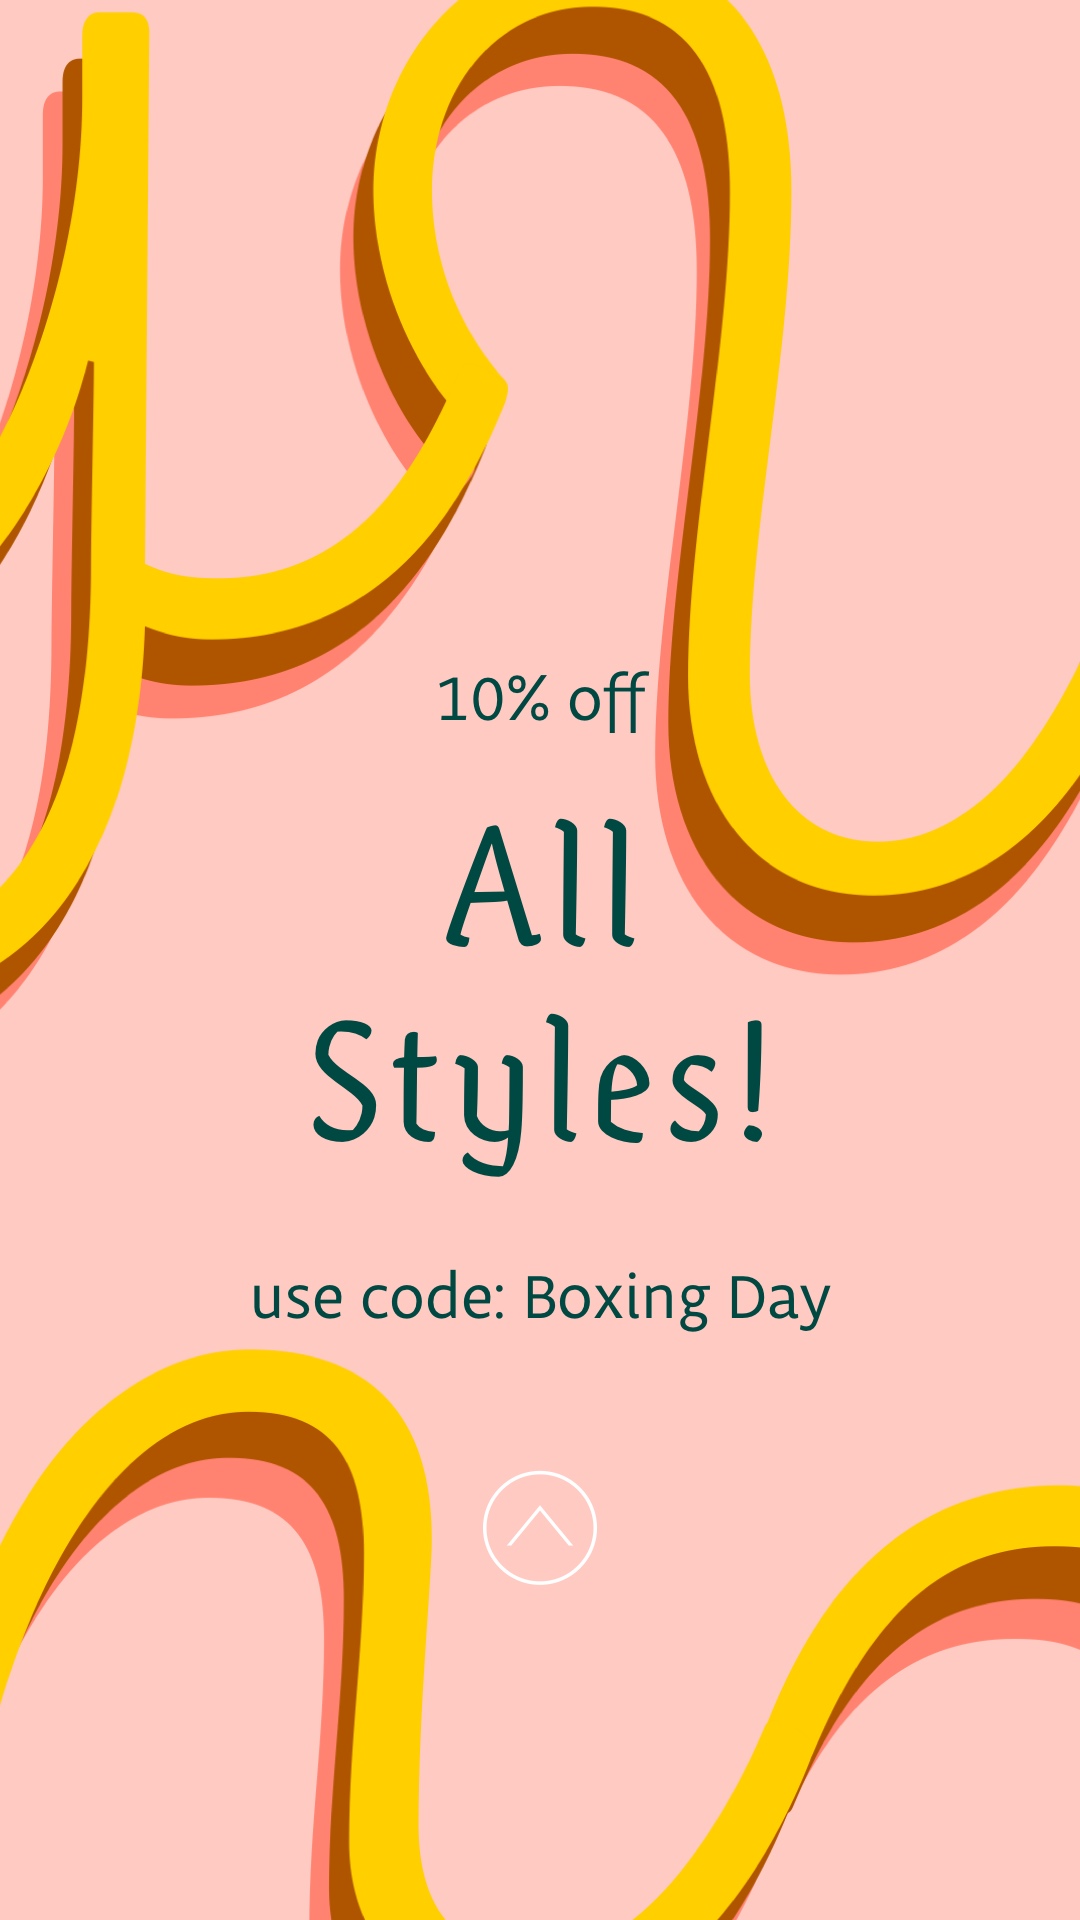 All Styles! All Styles! 10% off use code: Boxing Day